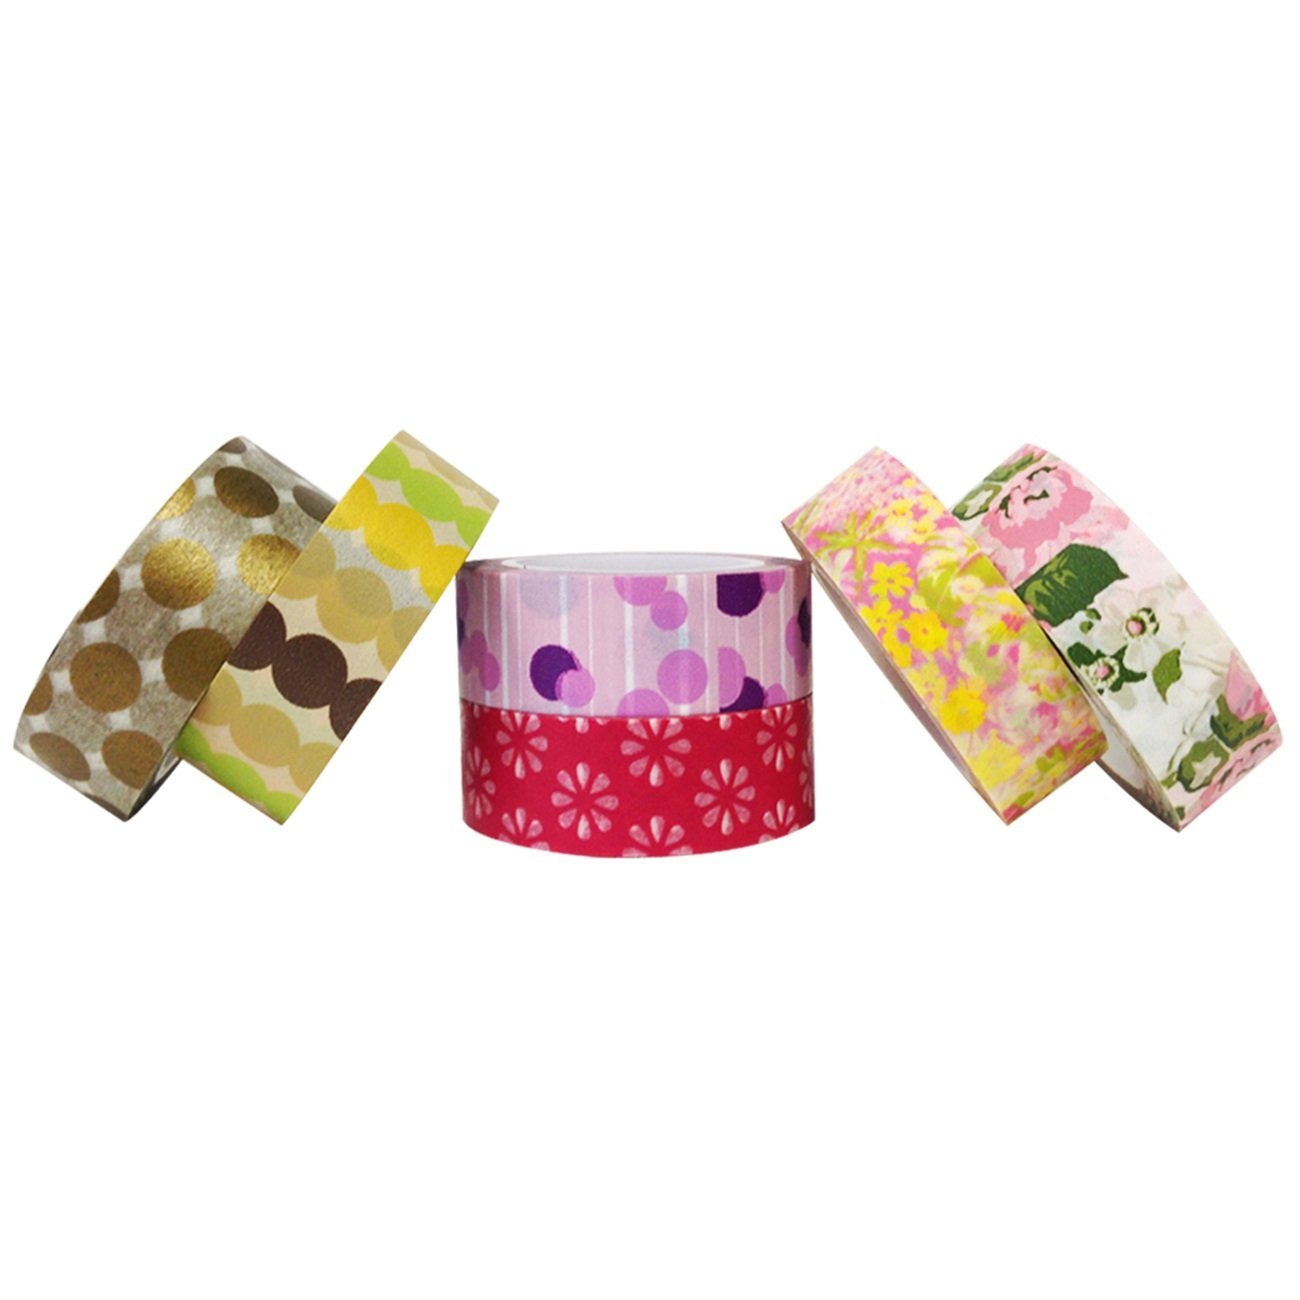 Wrapables Set of 6 Washi Tape + 40 Large Scalloped Multi-Color Gift Tags with Cut Strings